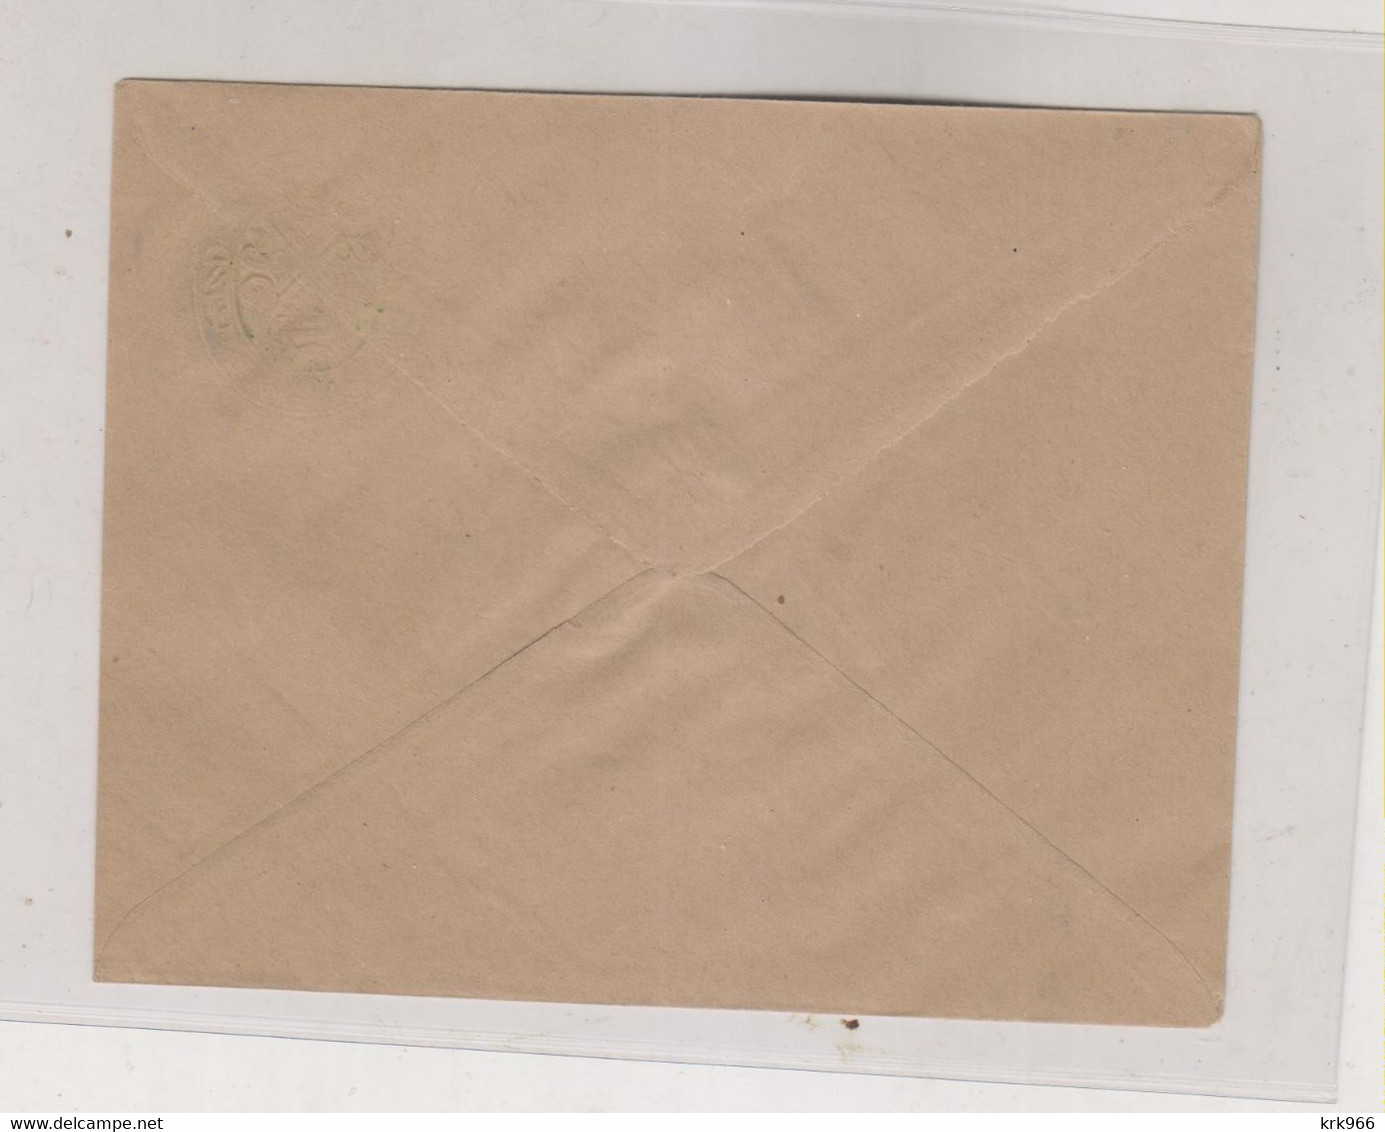 INDIA  Nice  Postal Stationery Cover - Covers